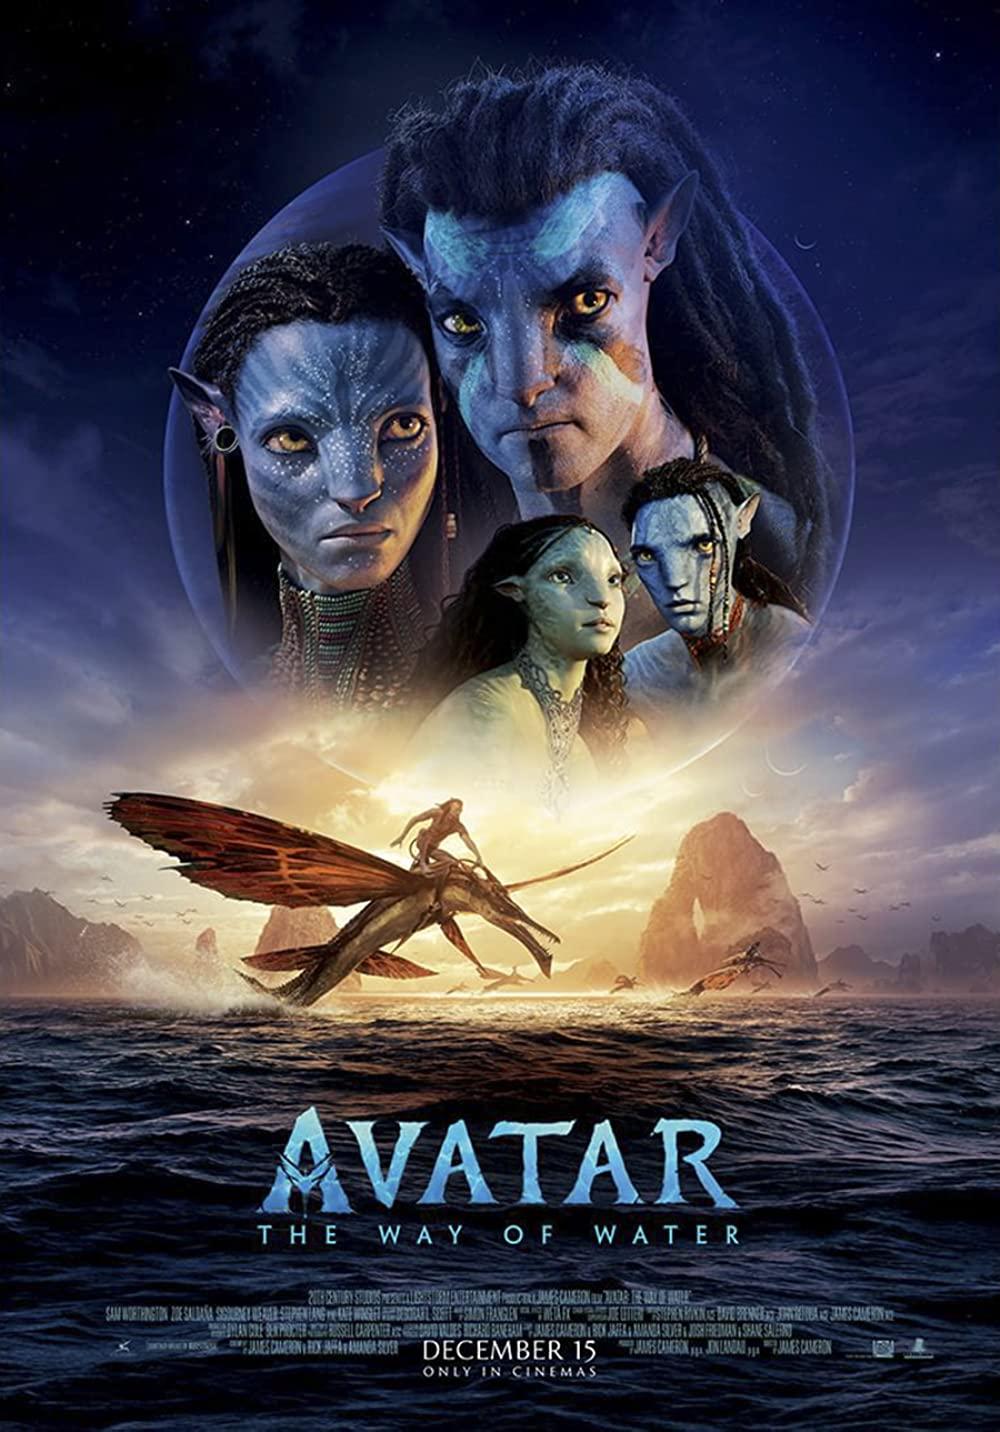 1. AVATAR : THE WAY OF WATER